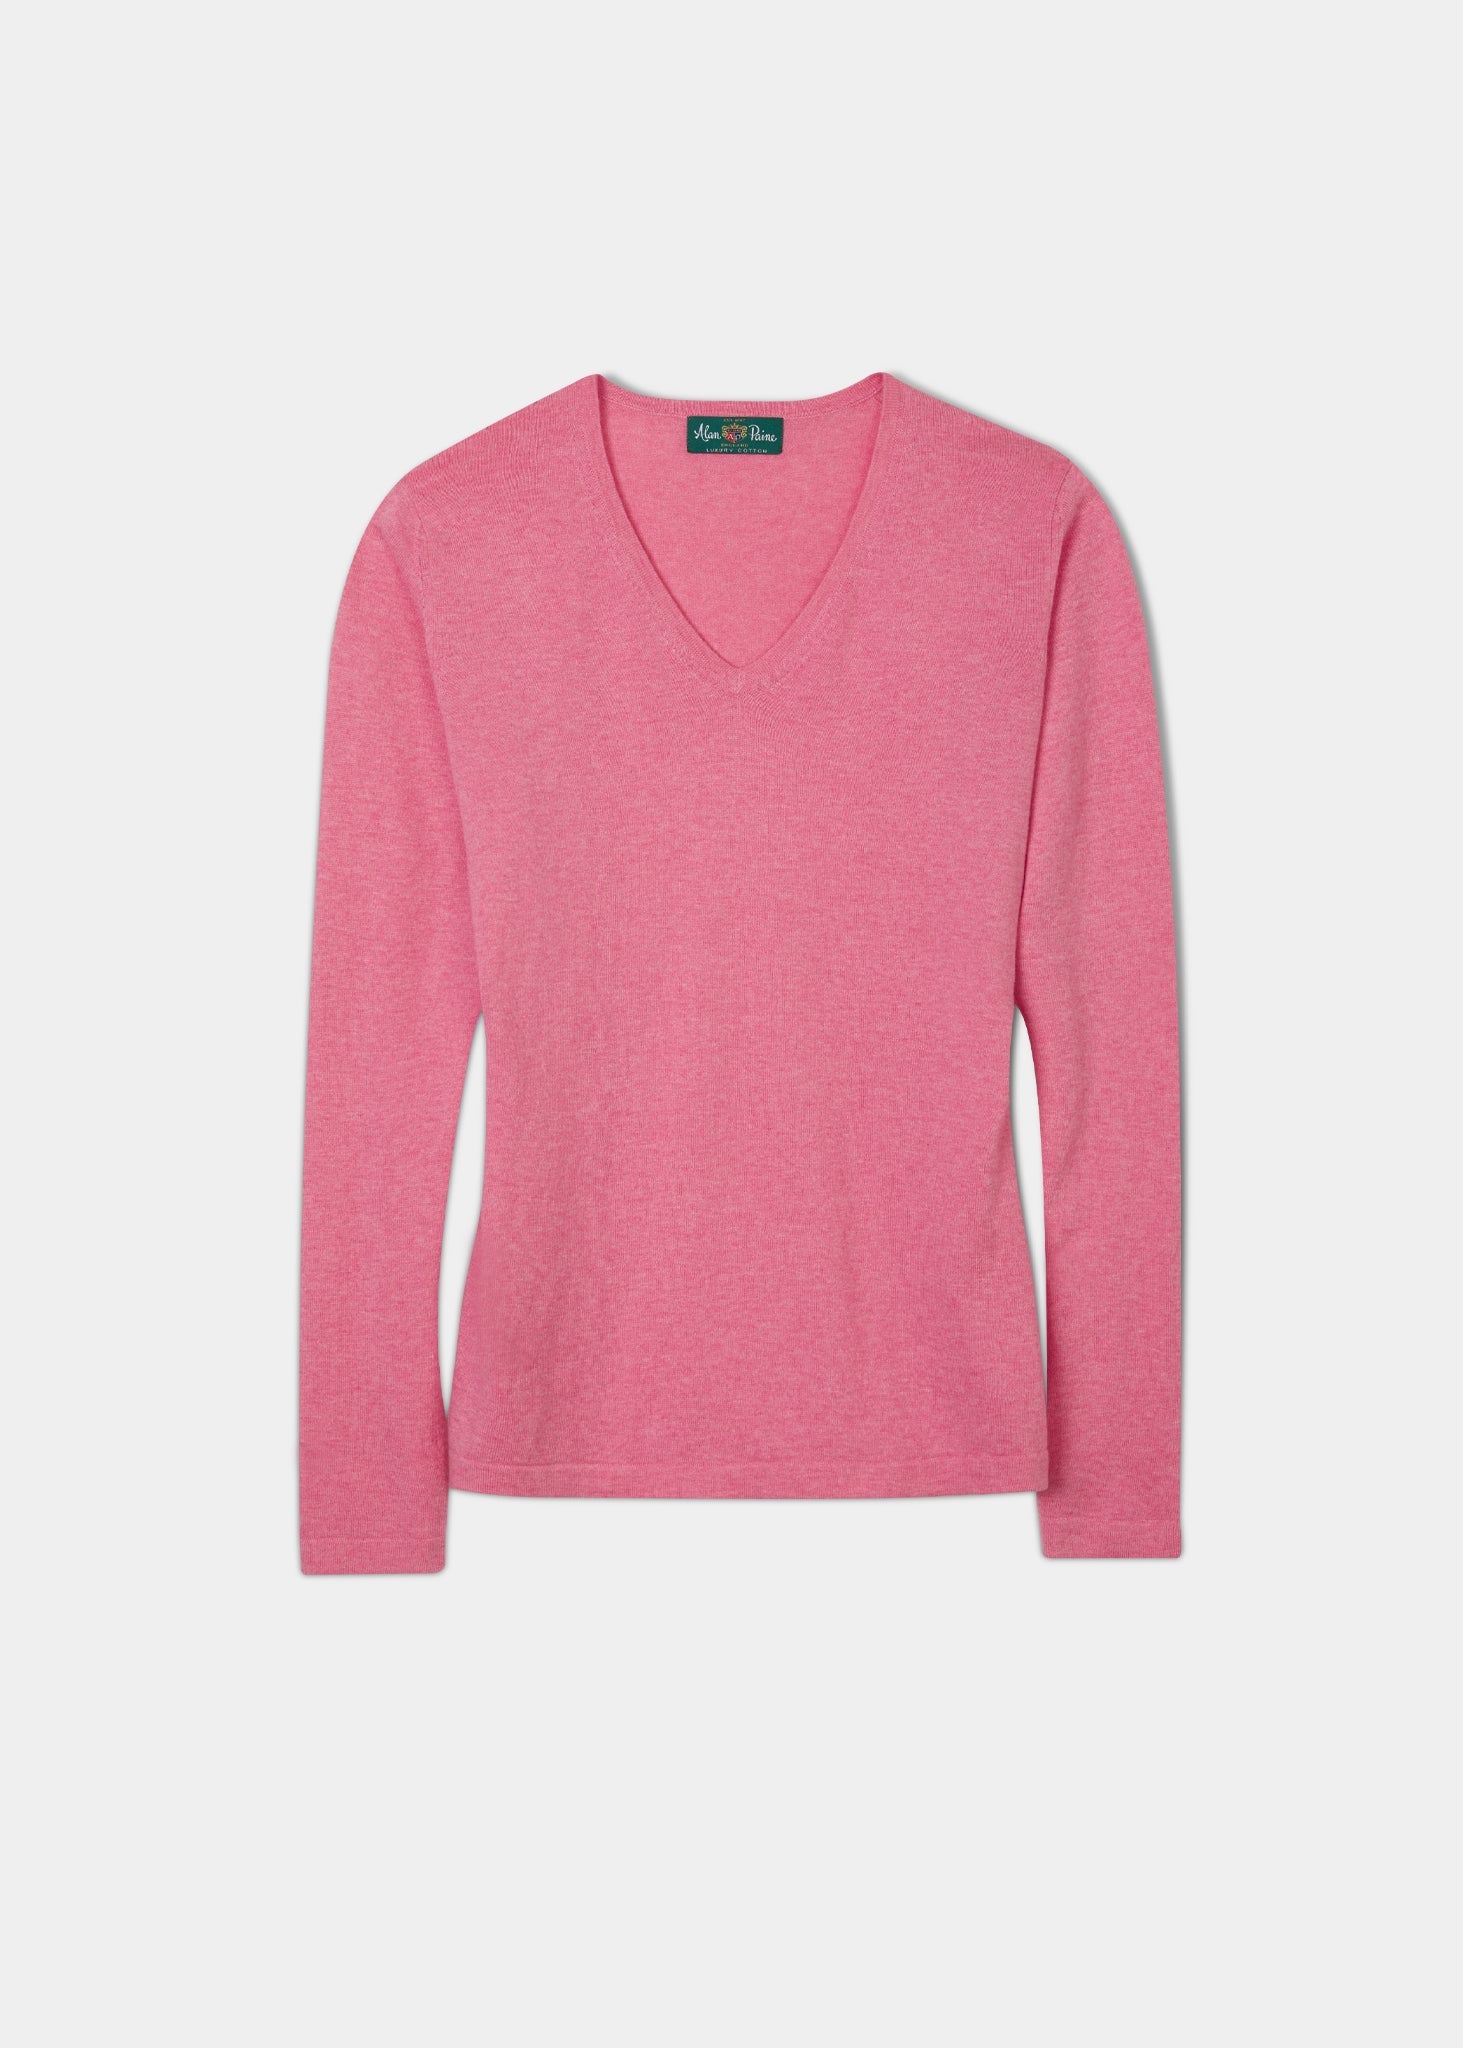 Ladies cotton cashmere jumper in colourway sand with a vee neck